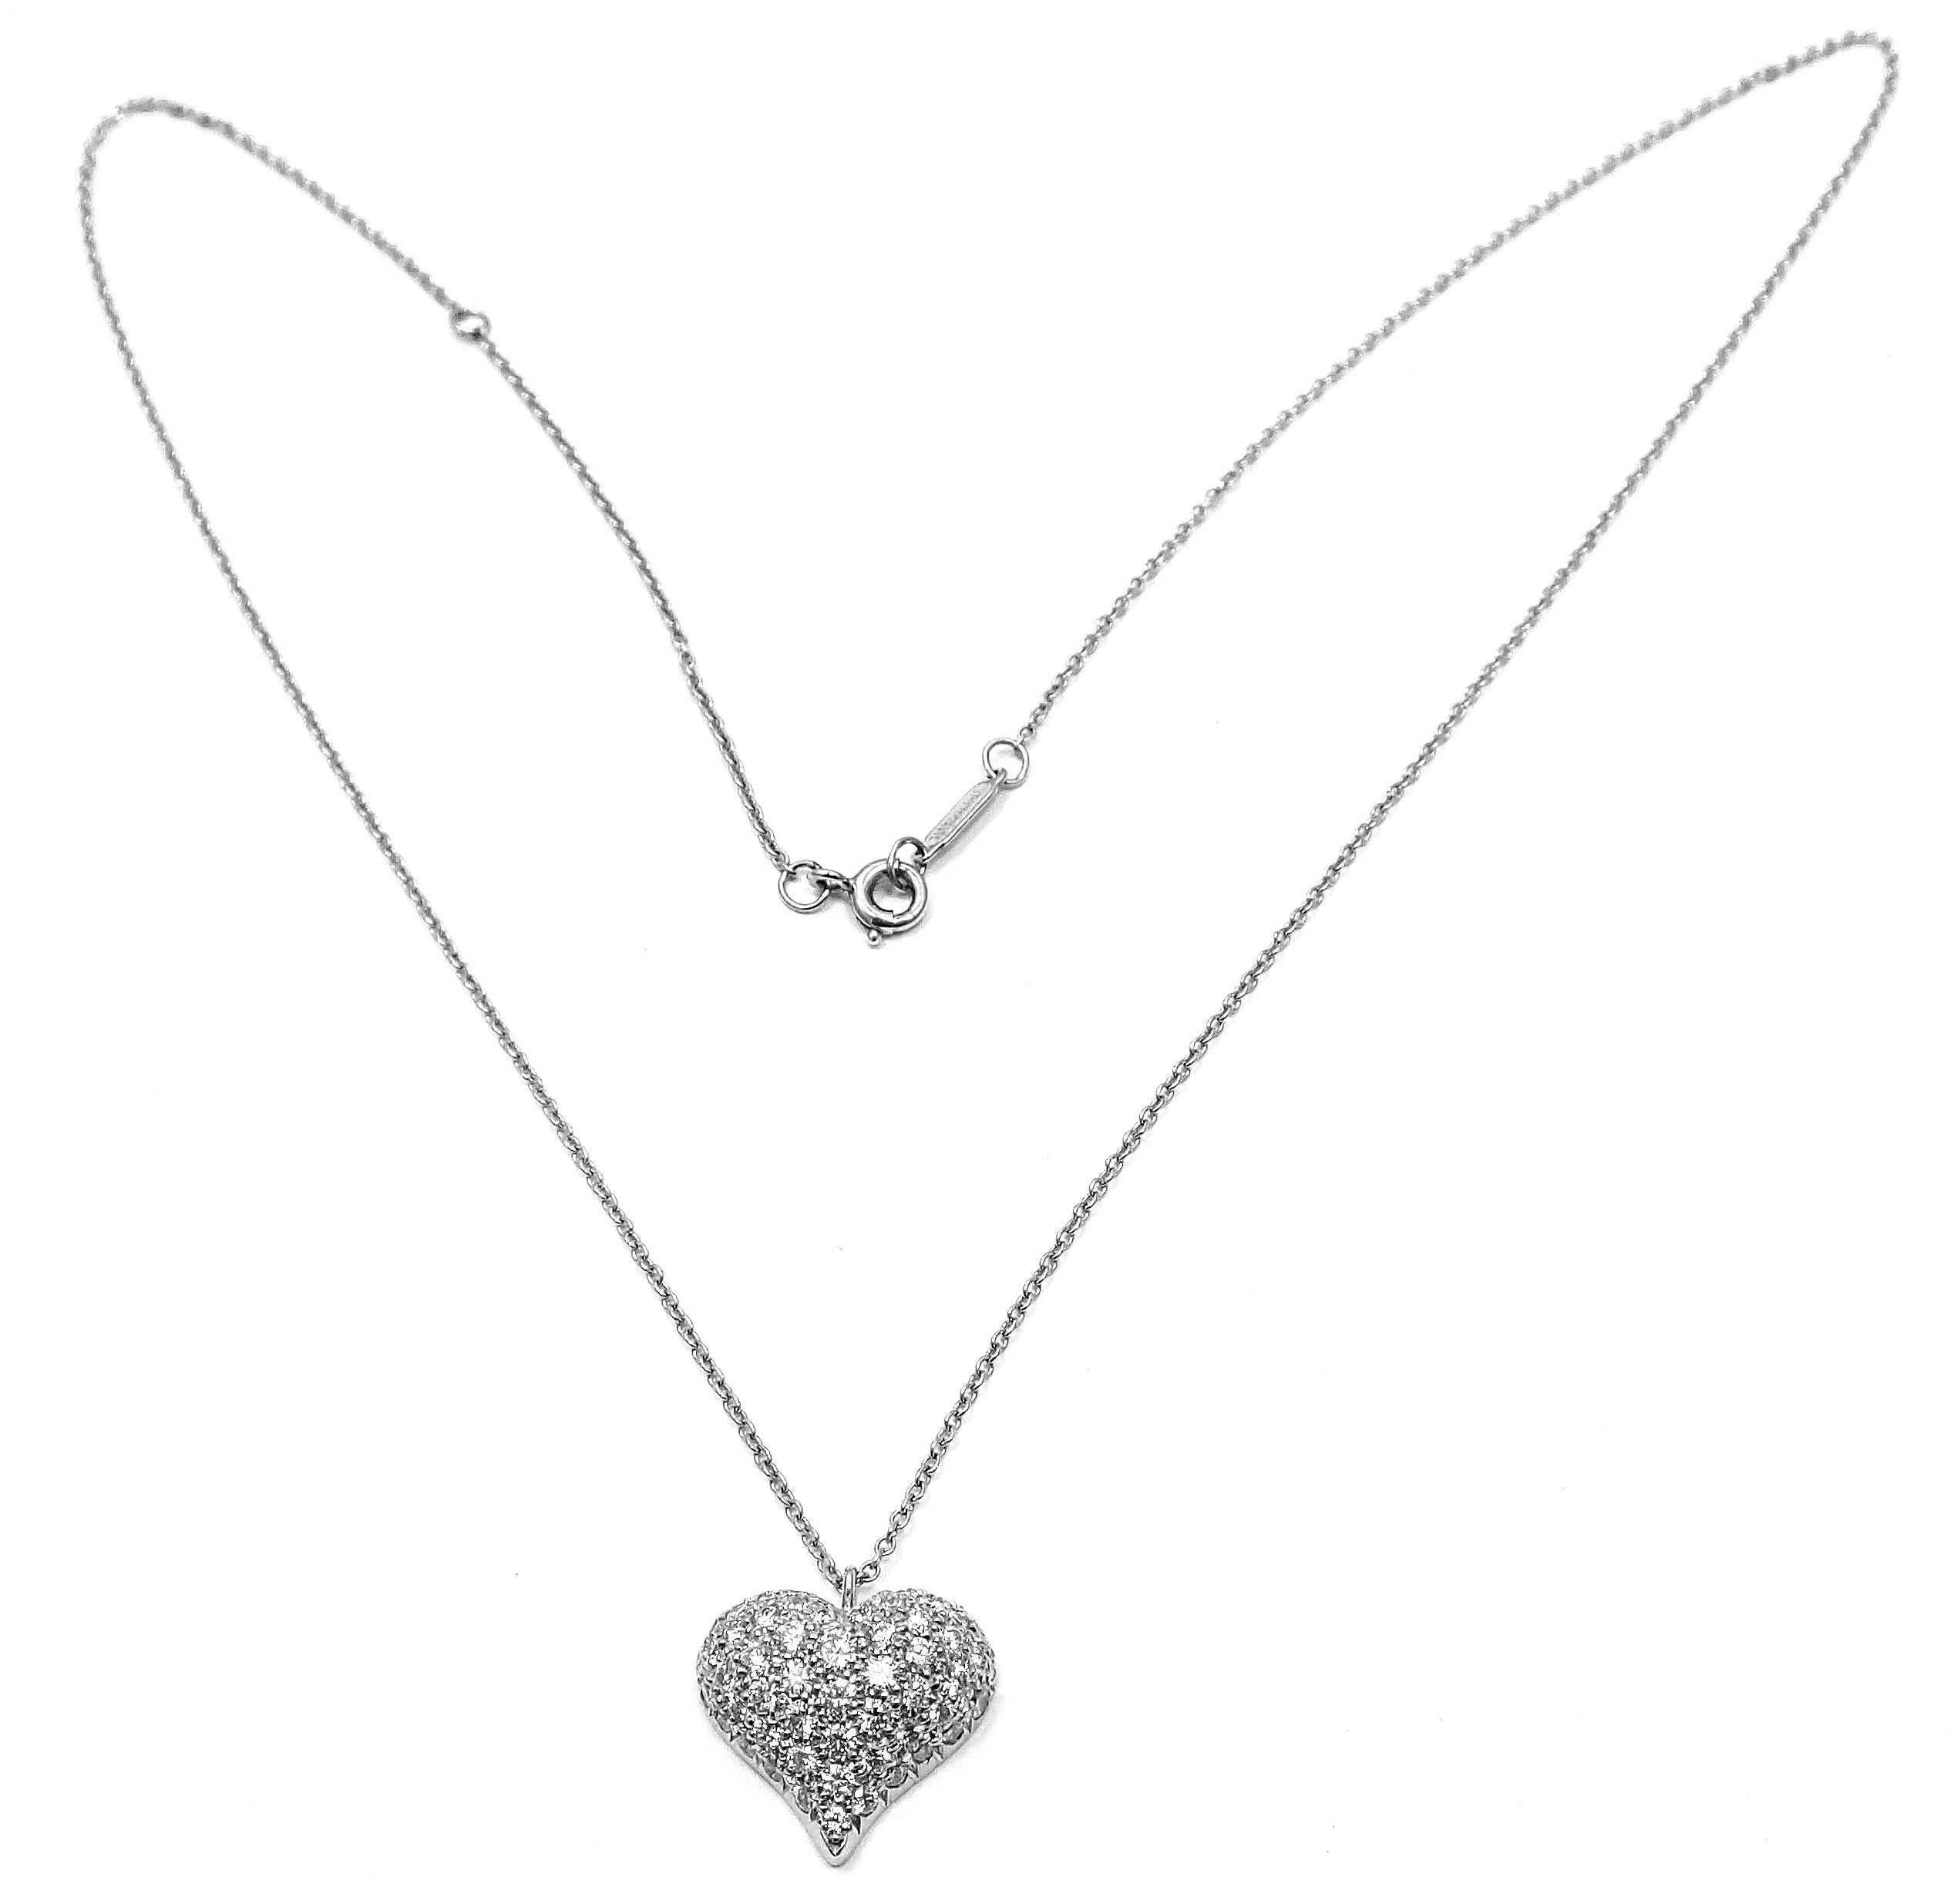 Platinum Pave Diamond Heart Pendant Necklace by Tiffany & Co.
With Round brilliant cut diamonds VS1 clarity, G color total weight approximately 2ct.
Details:
Length: 18